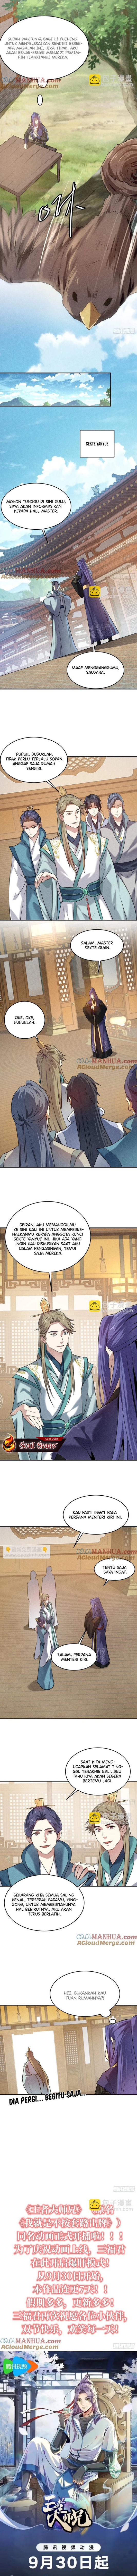 Dilarang COPAS - situs resmi www.mangacanblog.com - Komik i just dont play the card according to the routine 204 - chapter 204 205 Indonesia i just dont play the card according to the routine 204 - chapter 204 Terbaru 4|Baca Manga Komik Indonesia|Mangacan